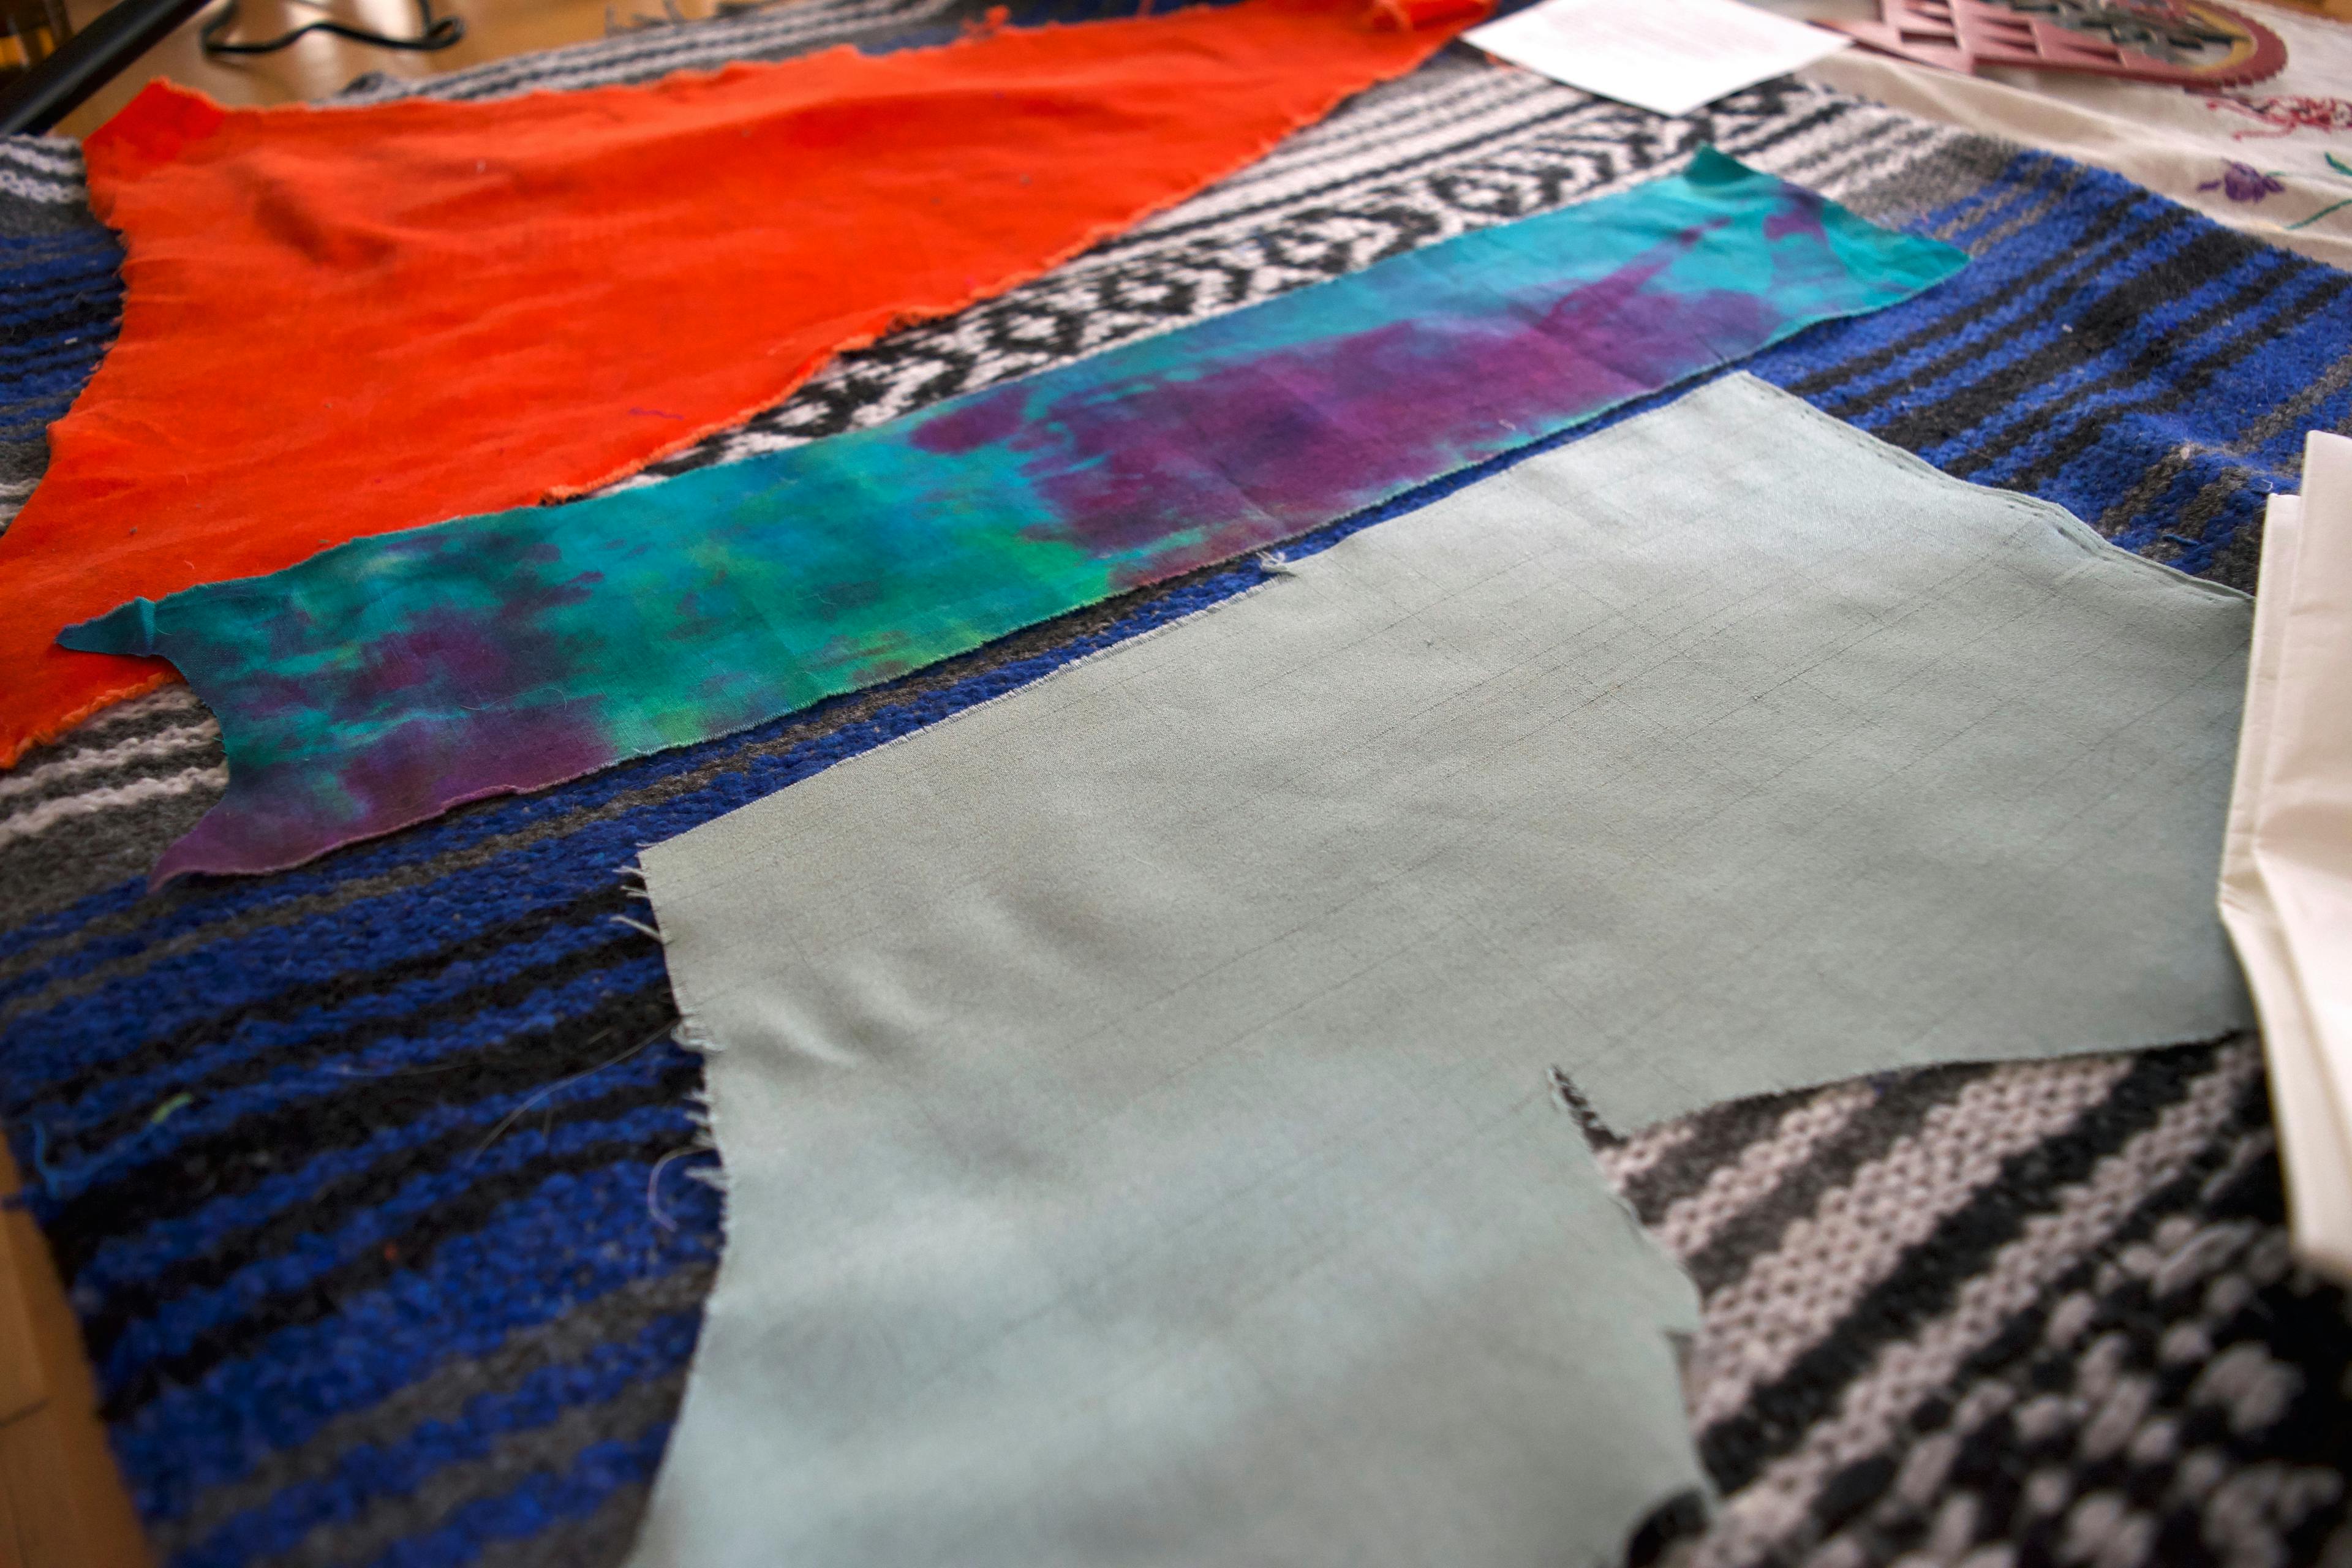 Three fabrics are laid out on Katrina's ironing surface, which is a blue yoga blanket. There is an orange velvet, a hand dyed blue and purple and green cotton, and a light blue thin fabric.